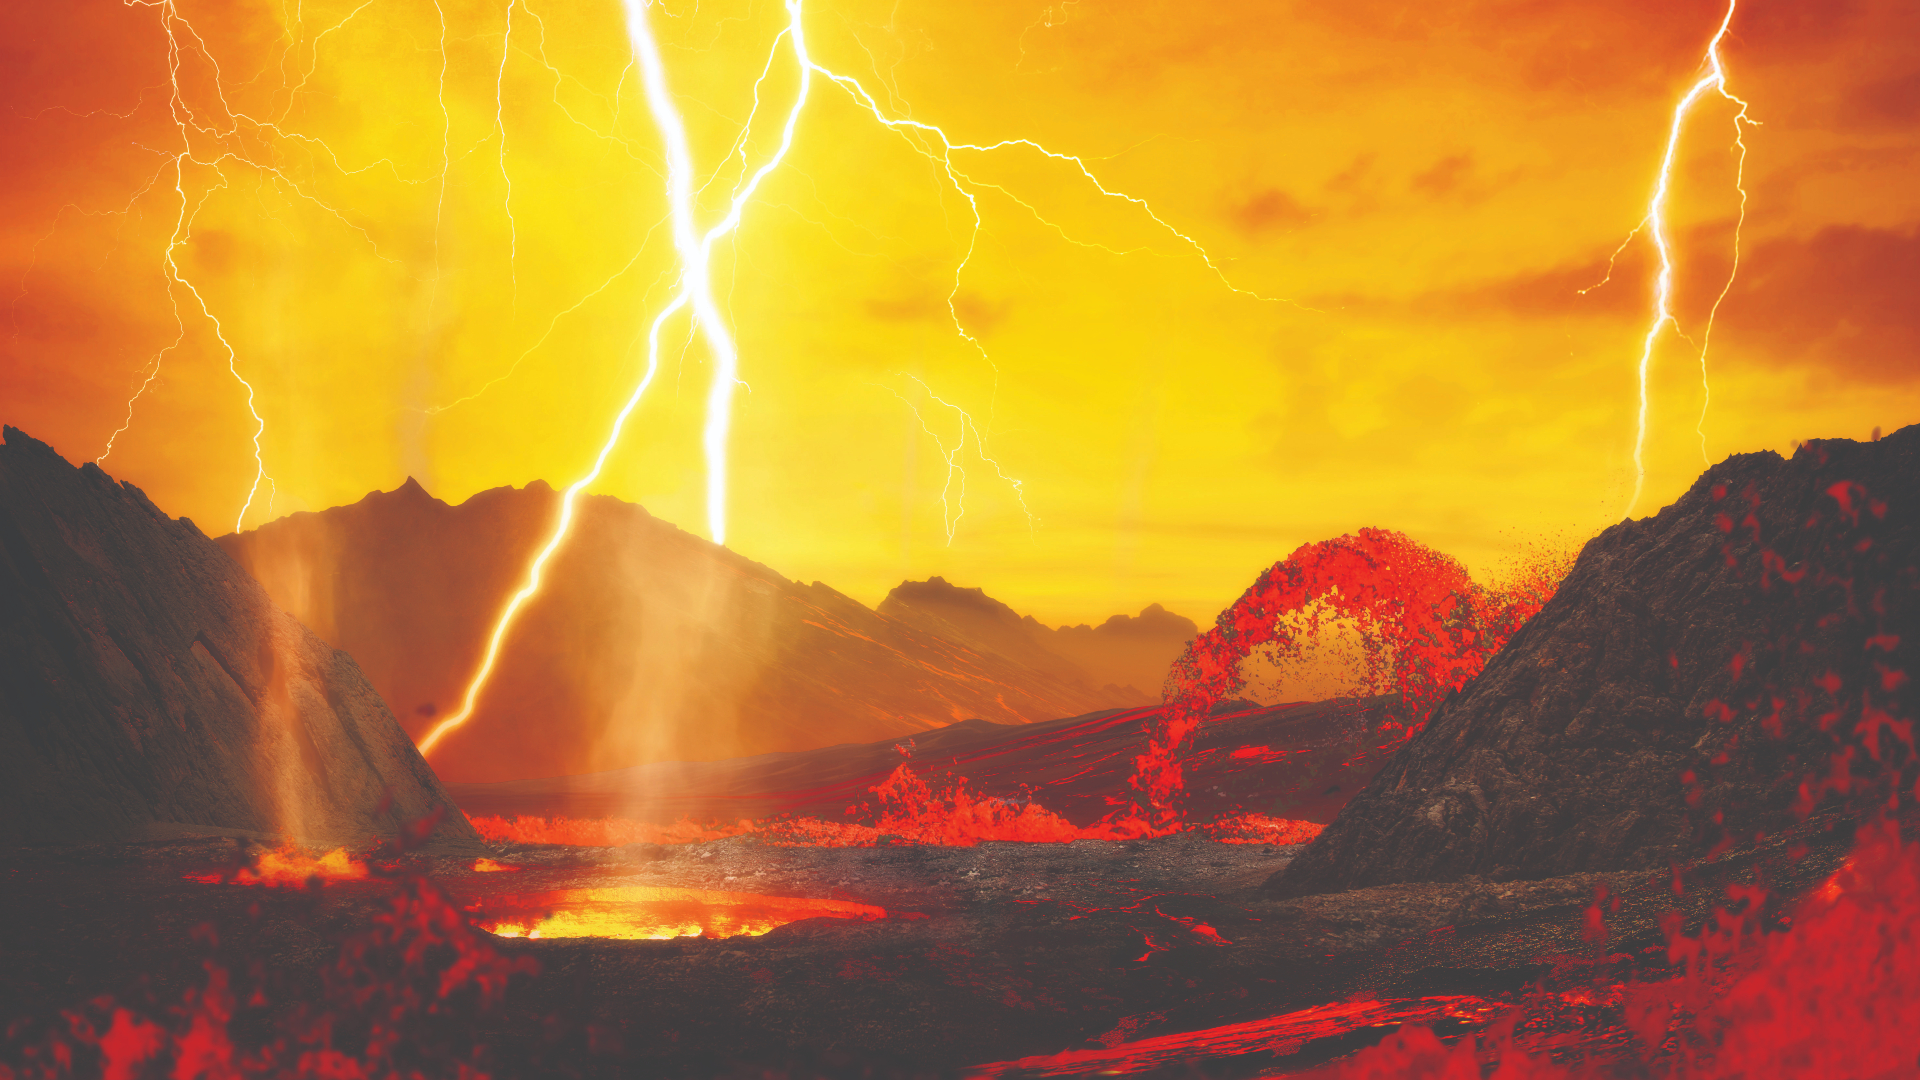 Artist's illustration showing molten lava lakes in the foreground and a bright lightning strikes appearing from a hazy yellow sky.